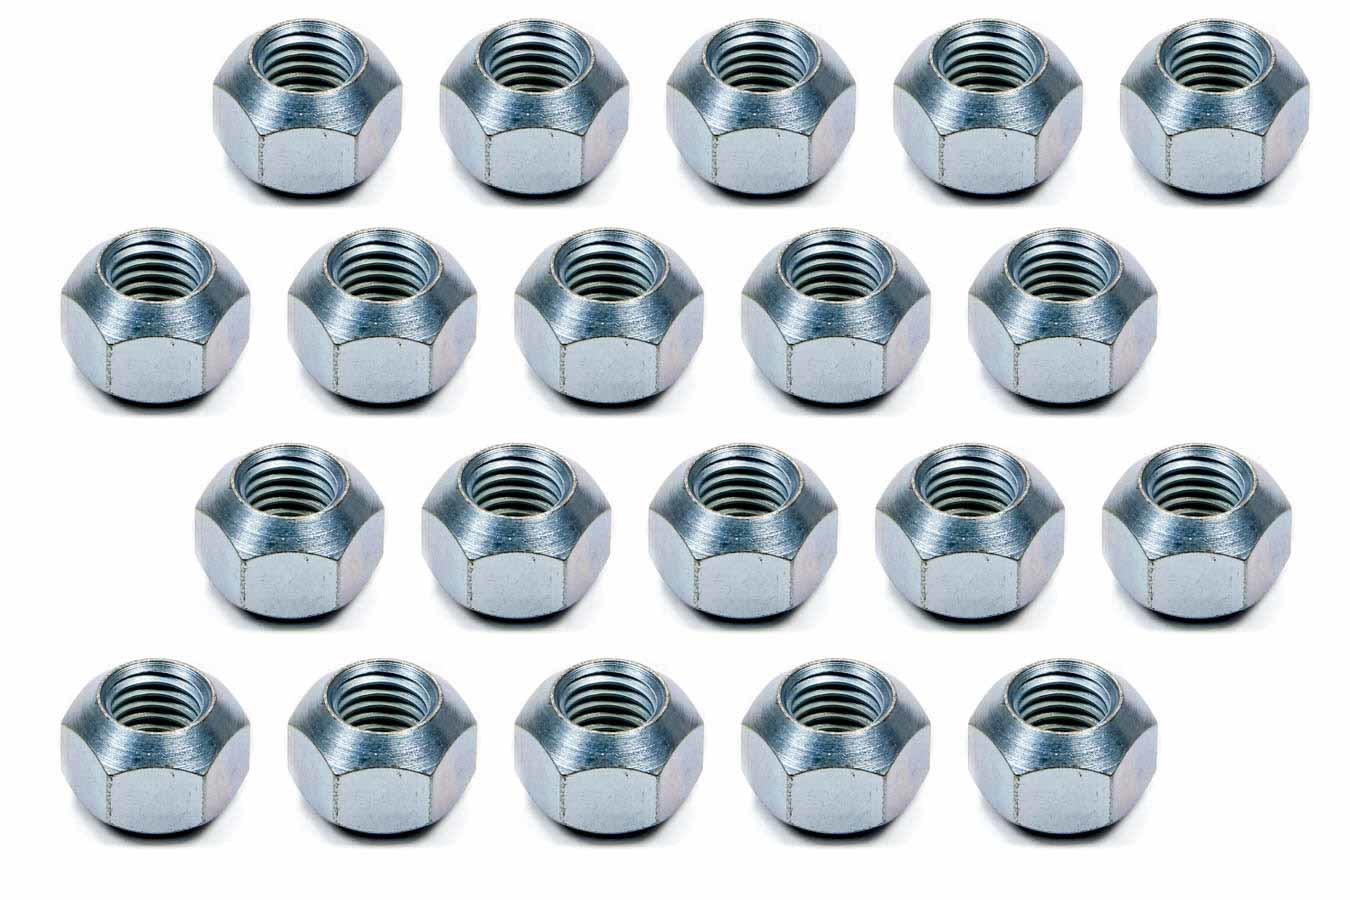 Klushman Racing Components 8212 Lug Nut, 5/8-11 in Right Hand Thread, 1 in Hex Head, Double 45 Degree, Open End, Steel, Zinc Oxide, Set of 20